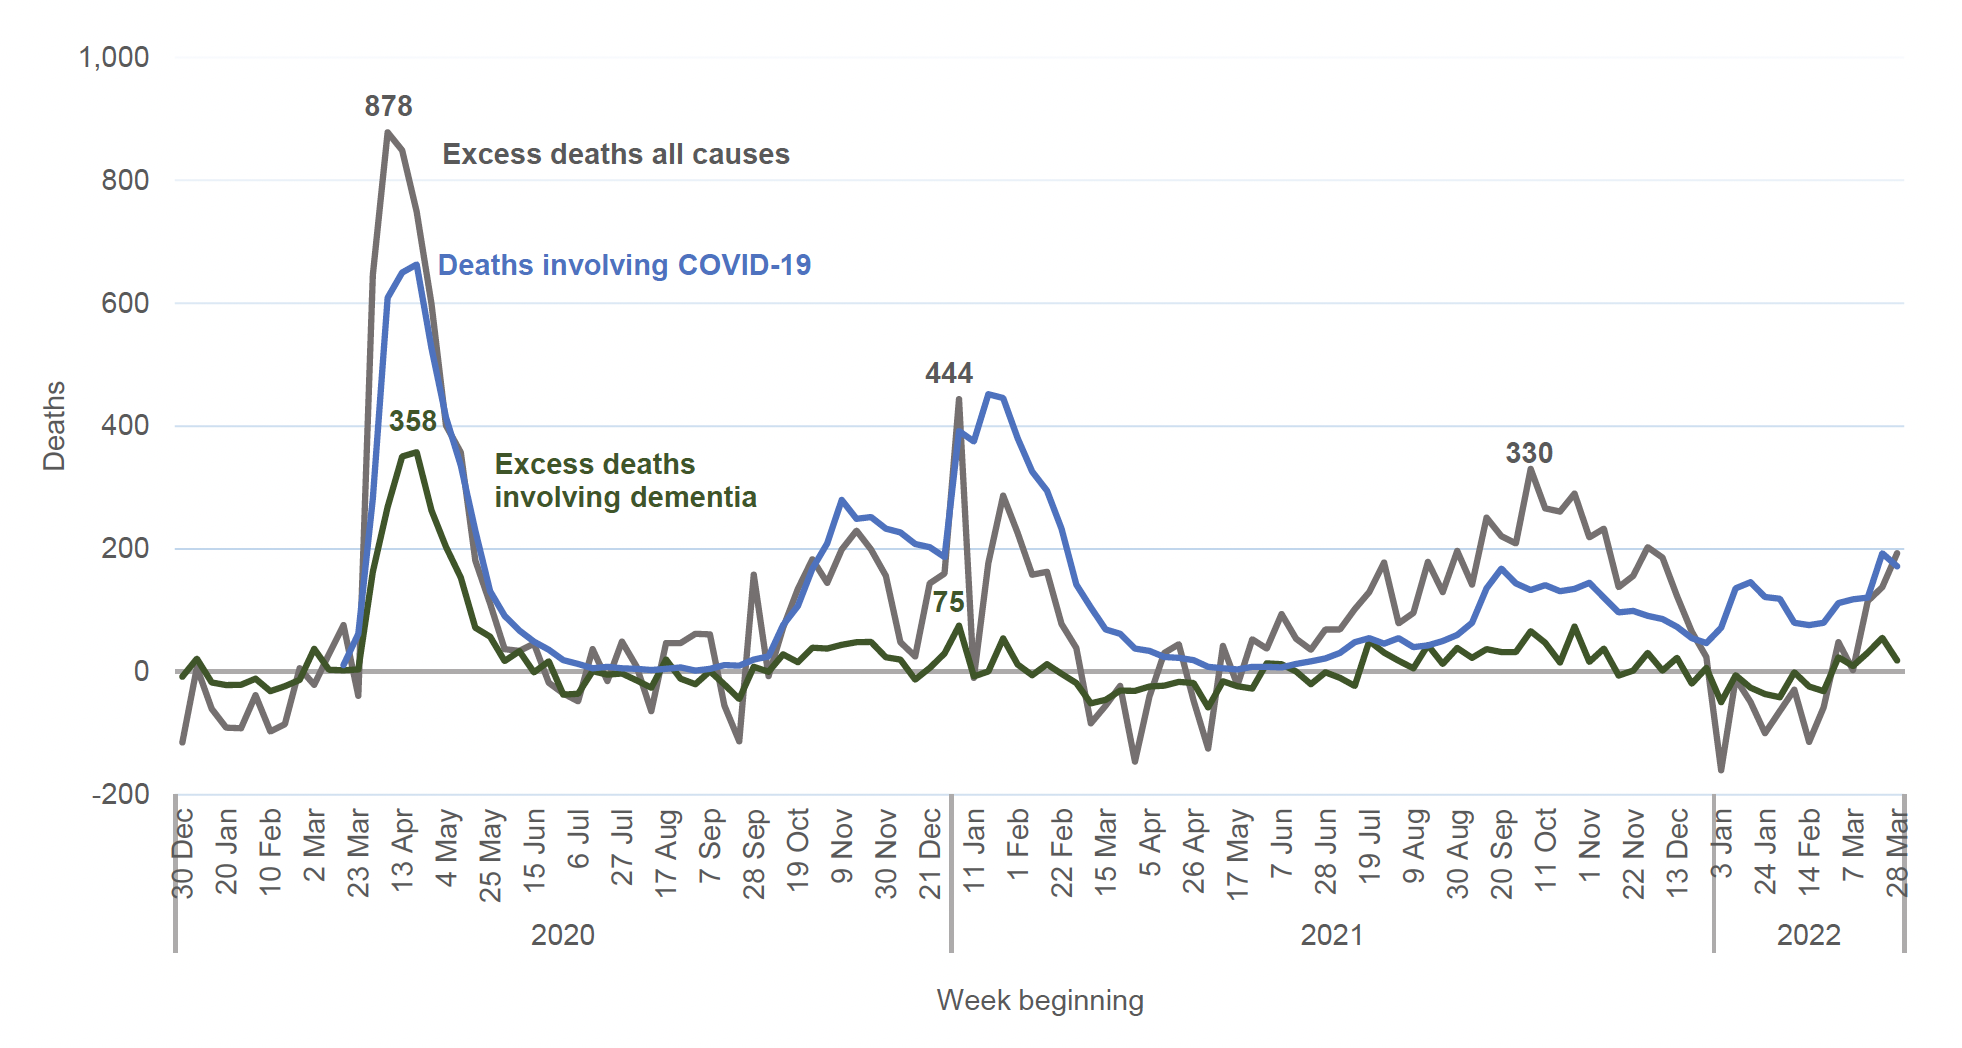 Figure 2: Line chart displaying the weekly number of excess deaths from all causes (grey), excess deaths involving dementia (green) and deaths involving COVID-19 (blue) in Scotland between January 2020 and March 2022.